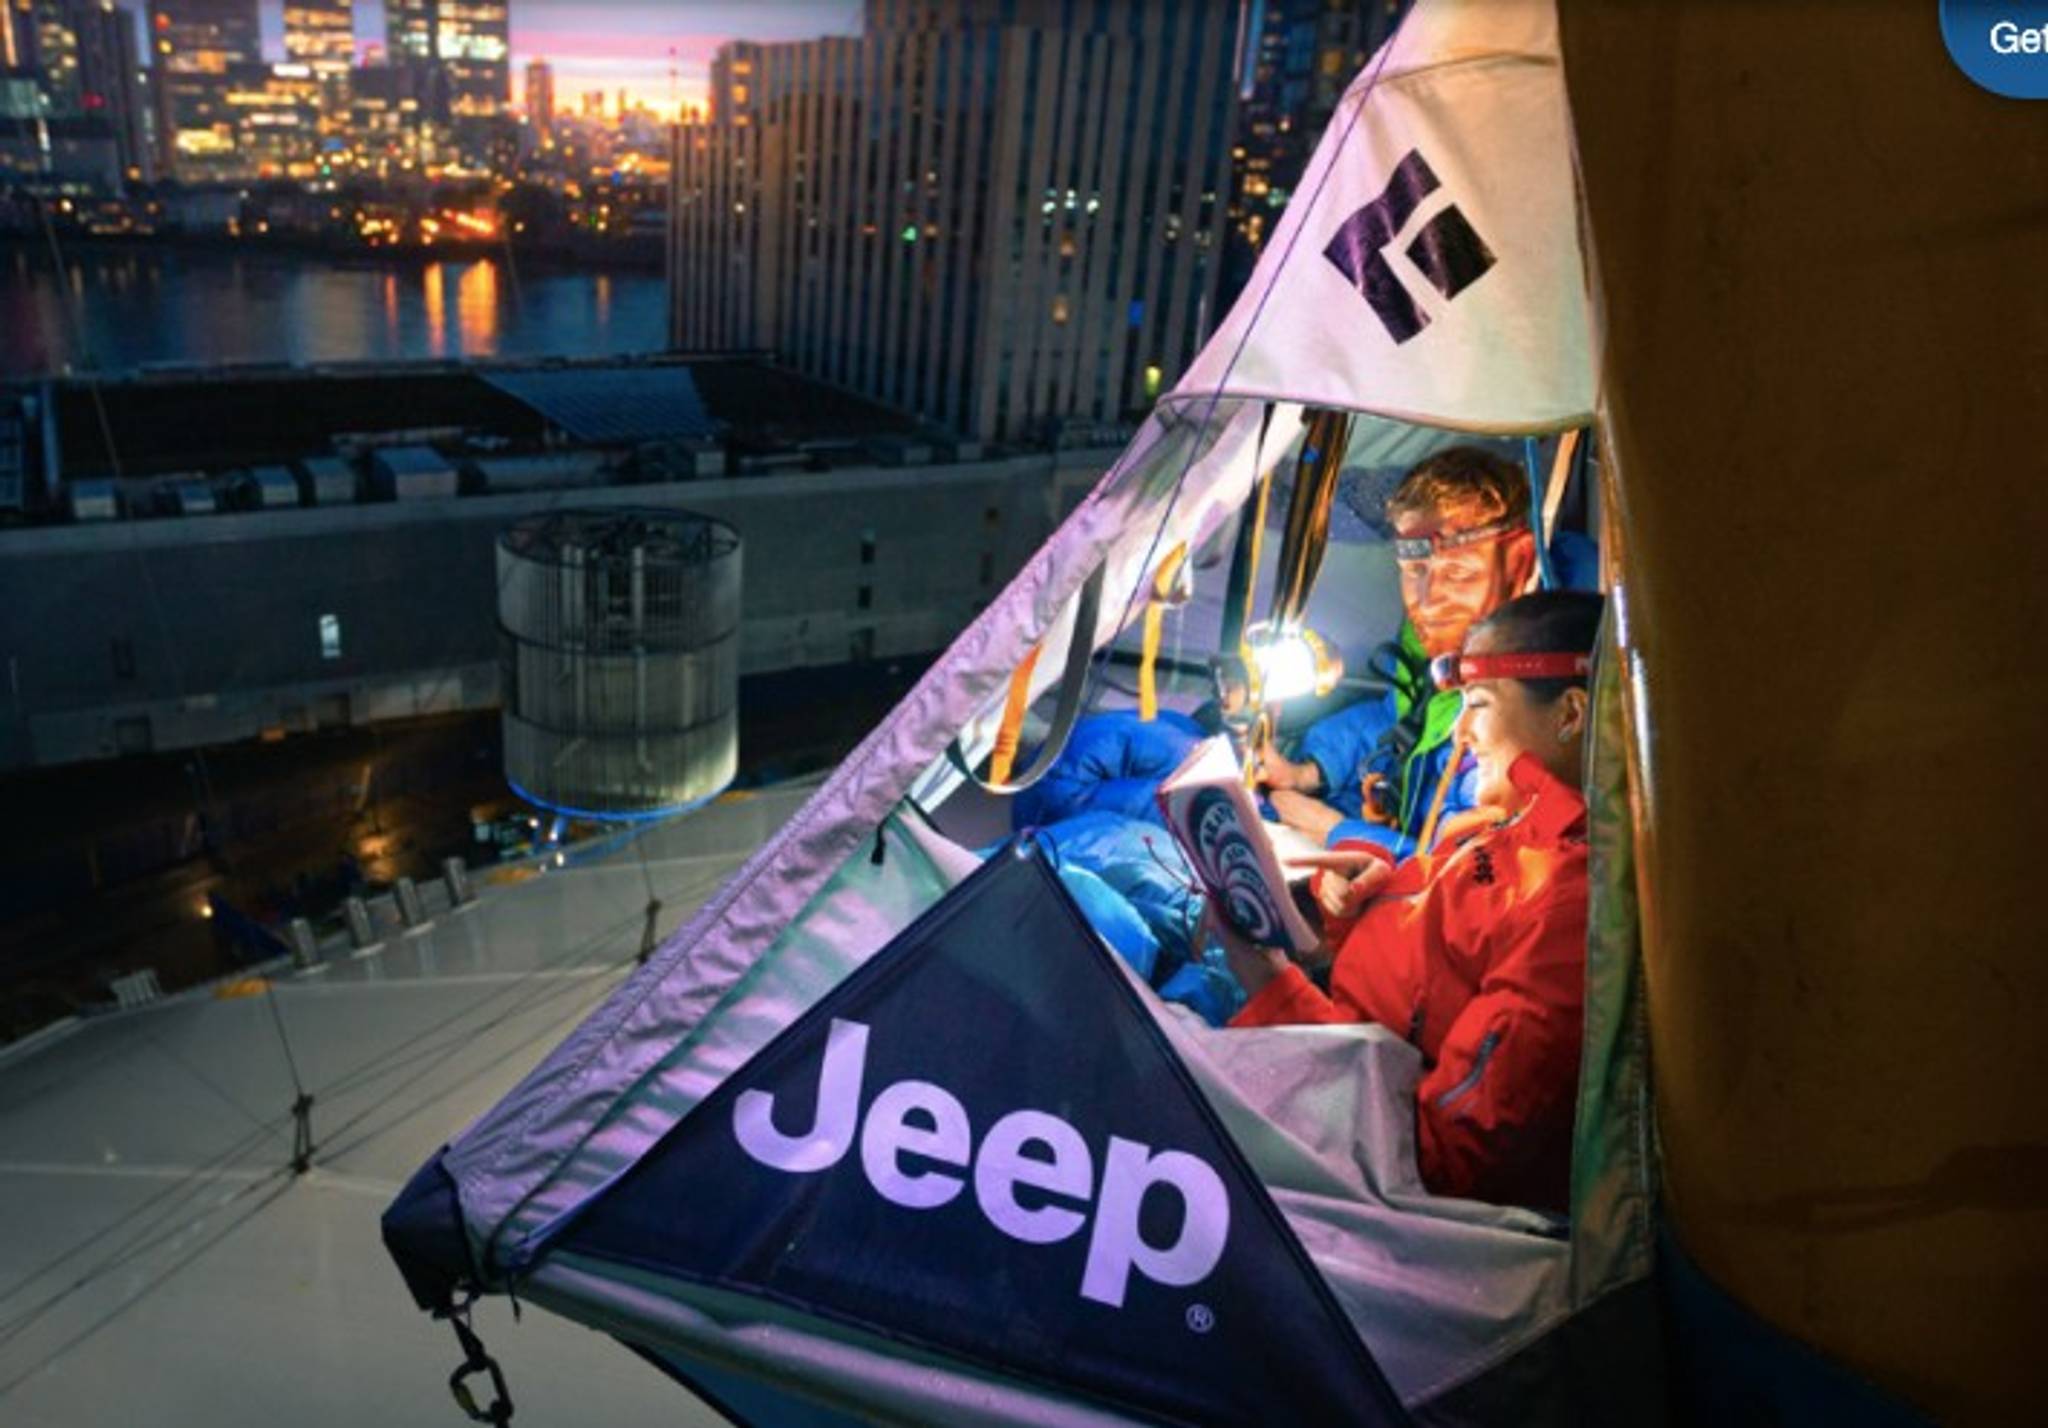 Jeep's O2 adventure elevates the staycation experience